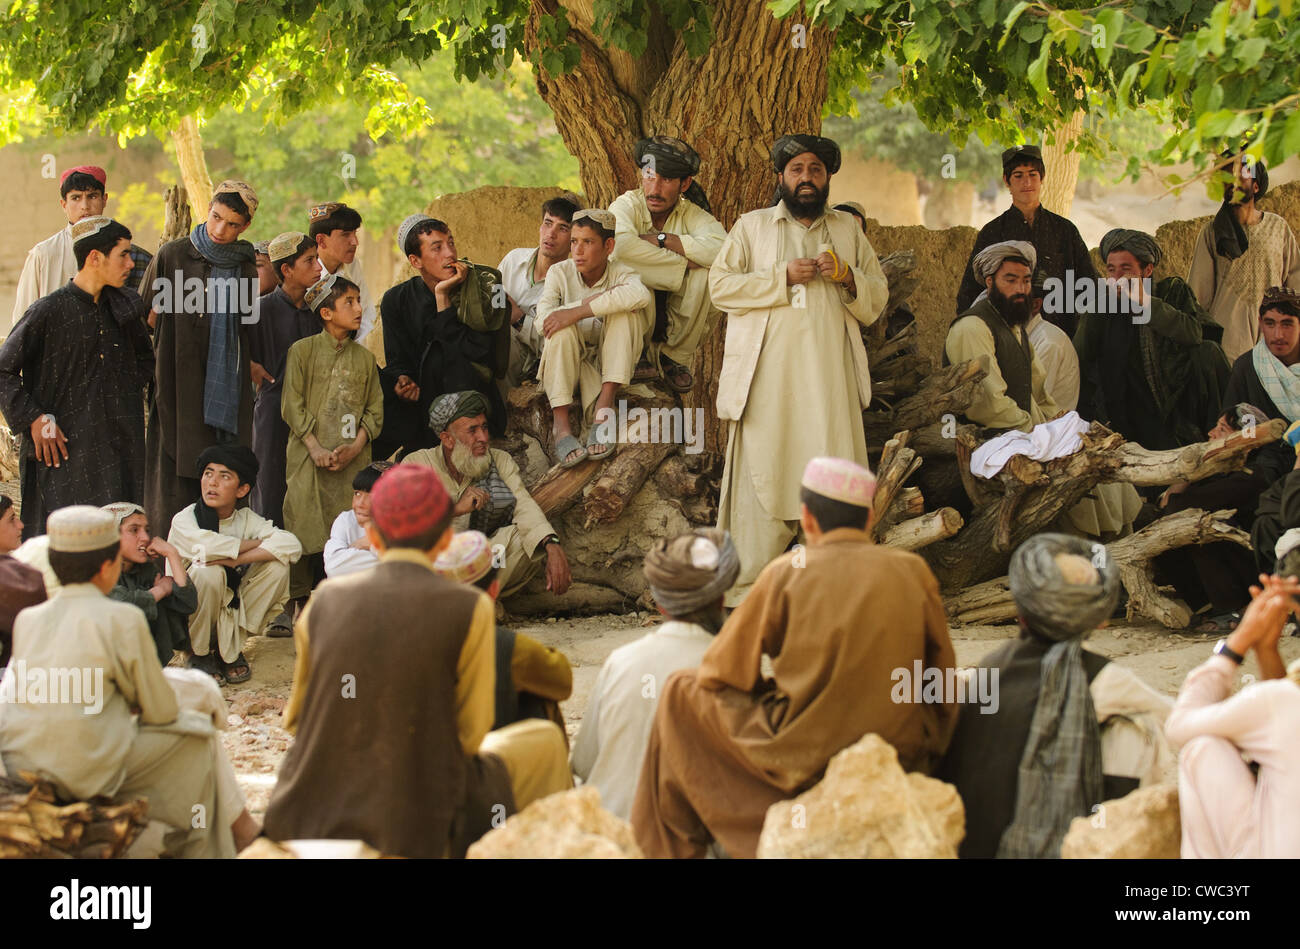 District chief Abdul Qayum center speaks to Afghan elders during a shura in Zabul province Afghanistan. Qayum discussed Stock Photo